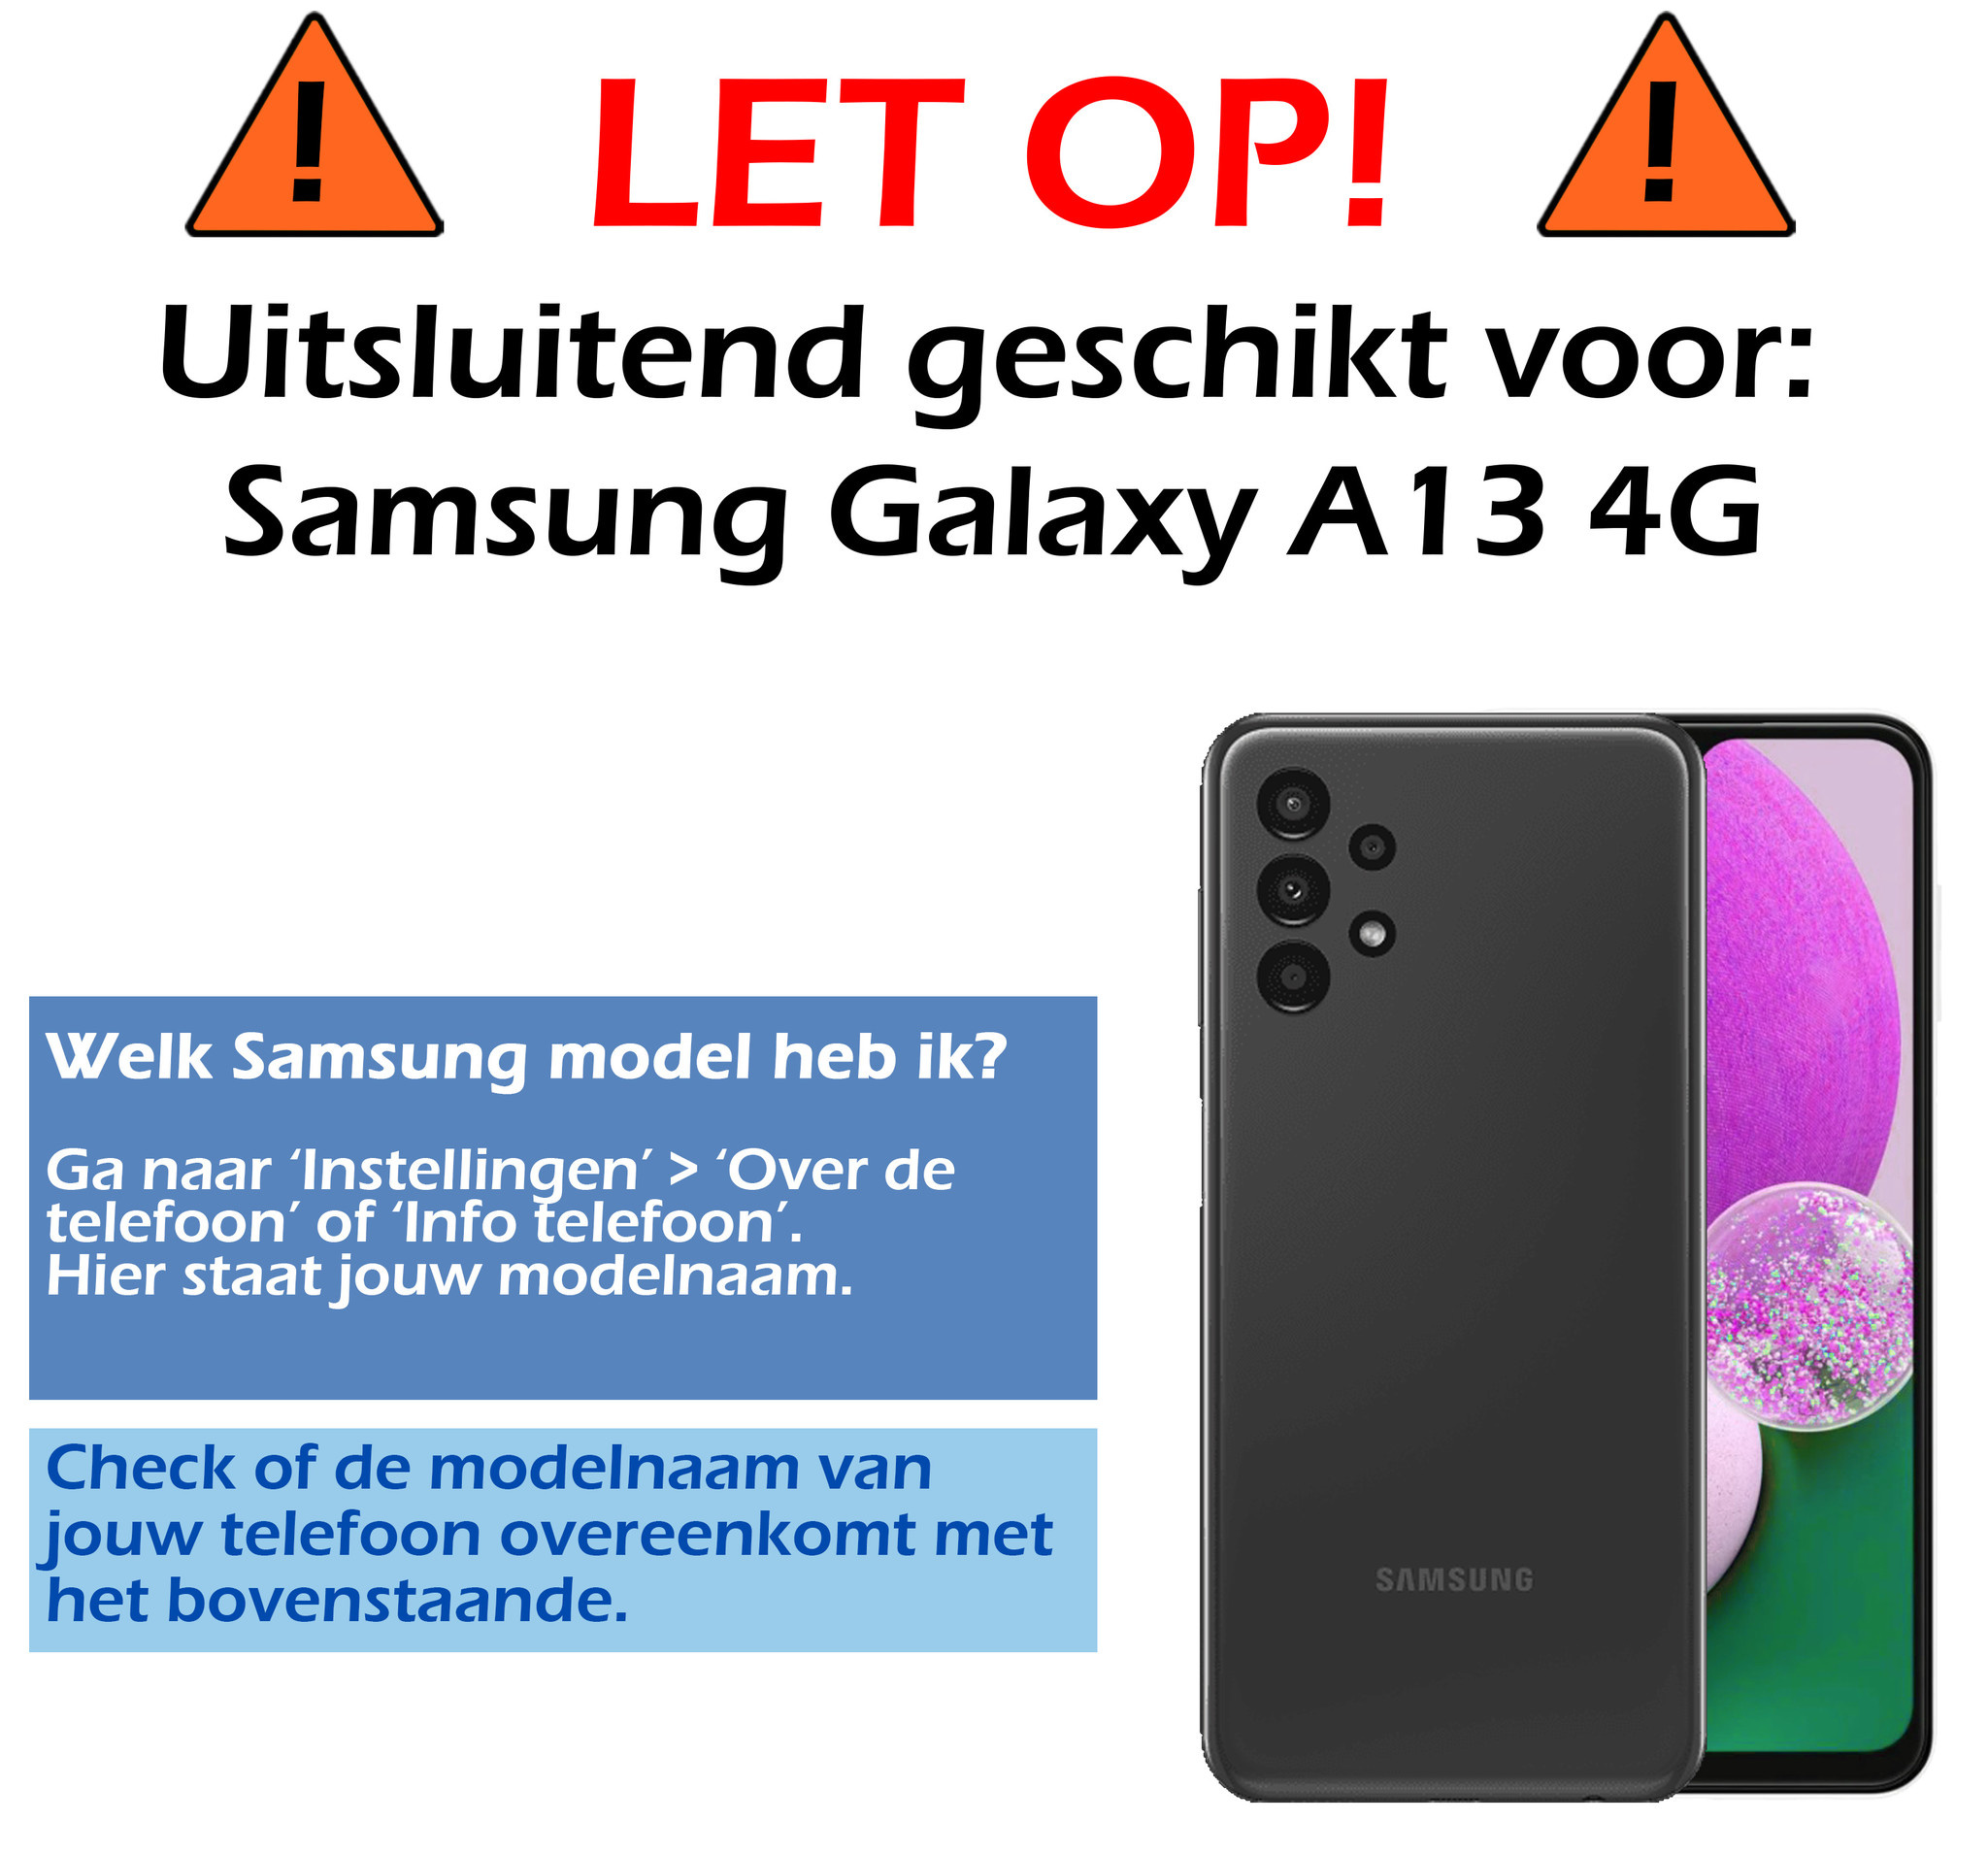 Samsung Galaxy A13 4G Hoesje Bookcase Met 2x Screenprotector - Samsung Galaxy A13 4G Screenprotector 2x - Samsung Galaxy A13 4G Book Case Met 2x Screenprotector Rood